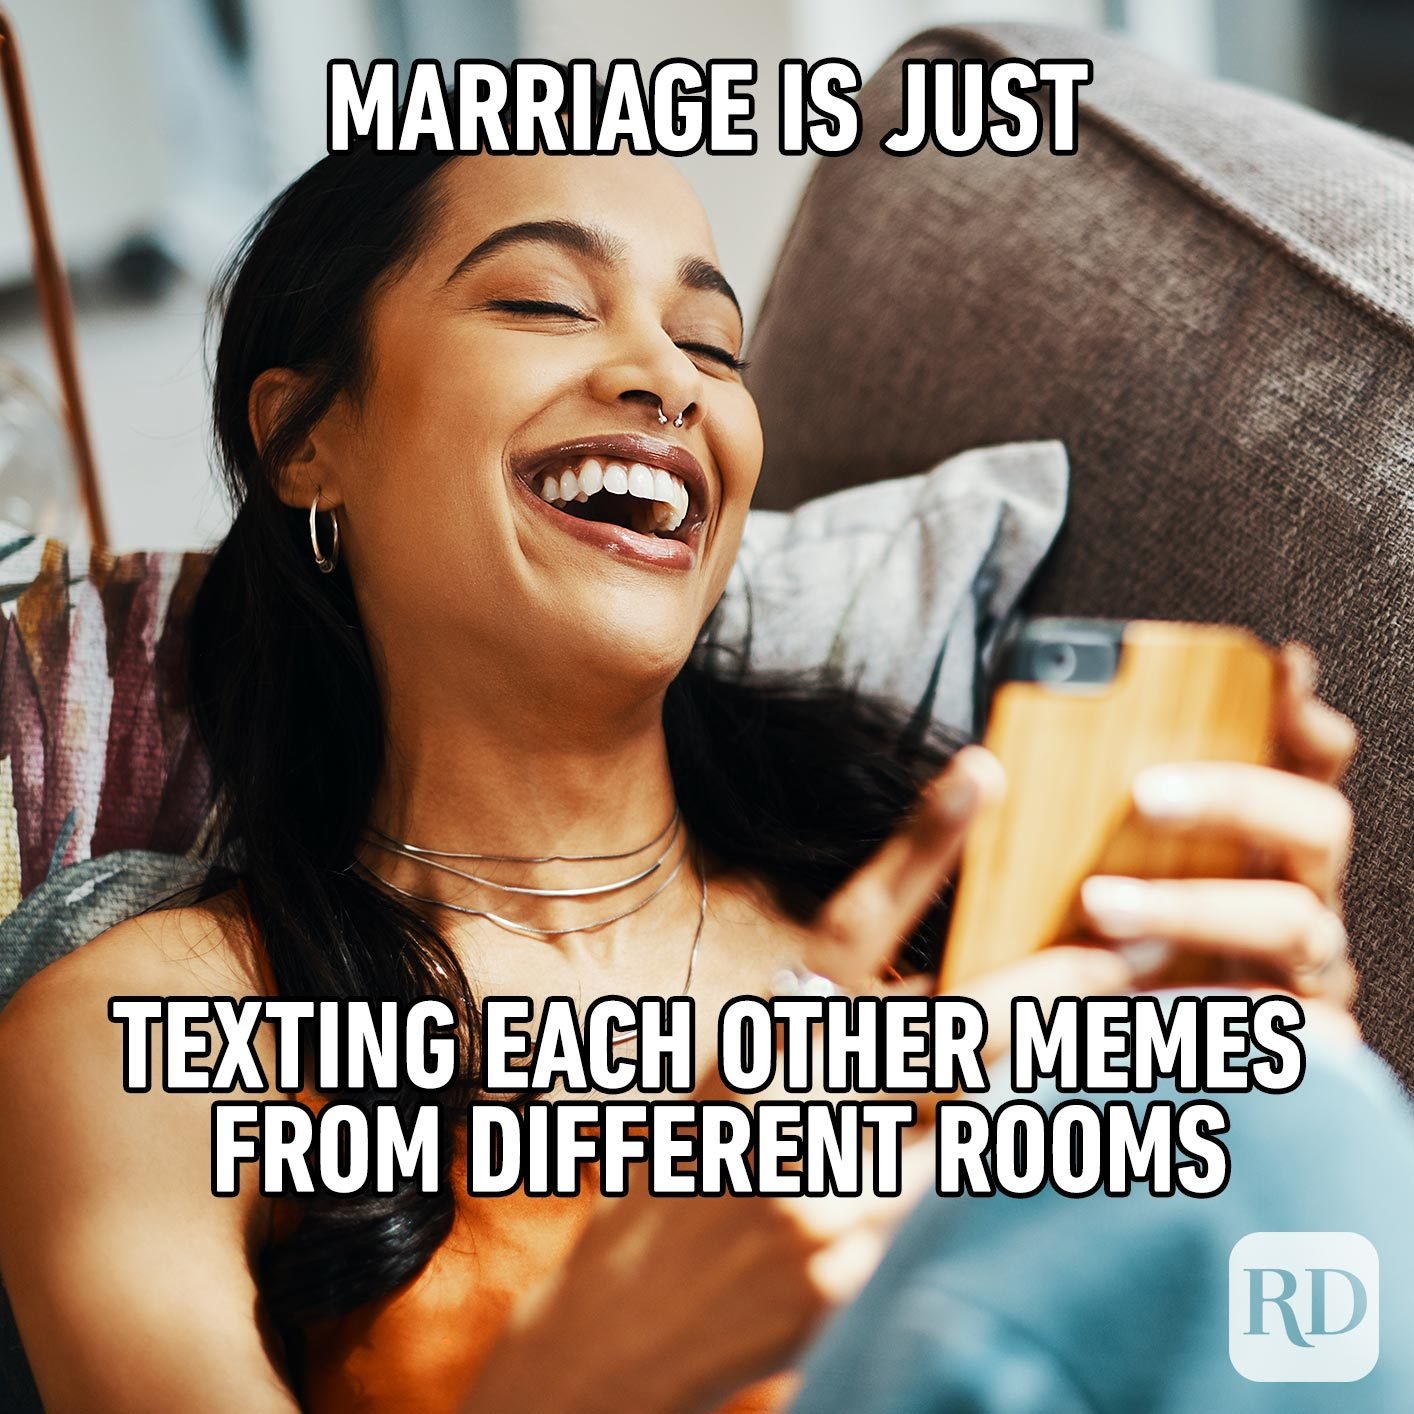 17 Hilarious Marriage Memes Every Married Couple Can Relate To